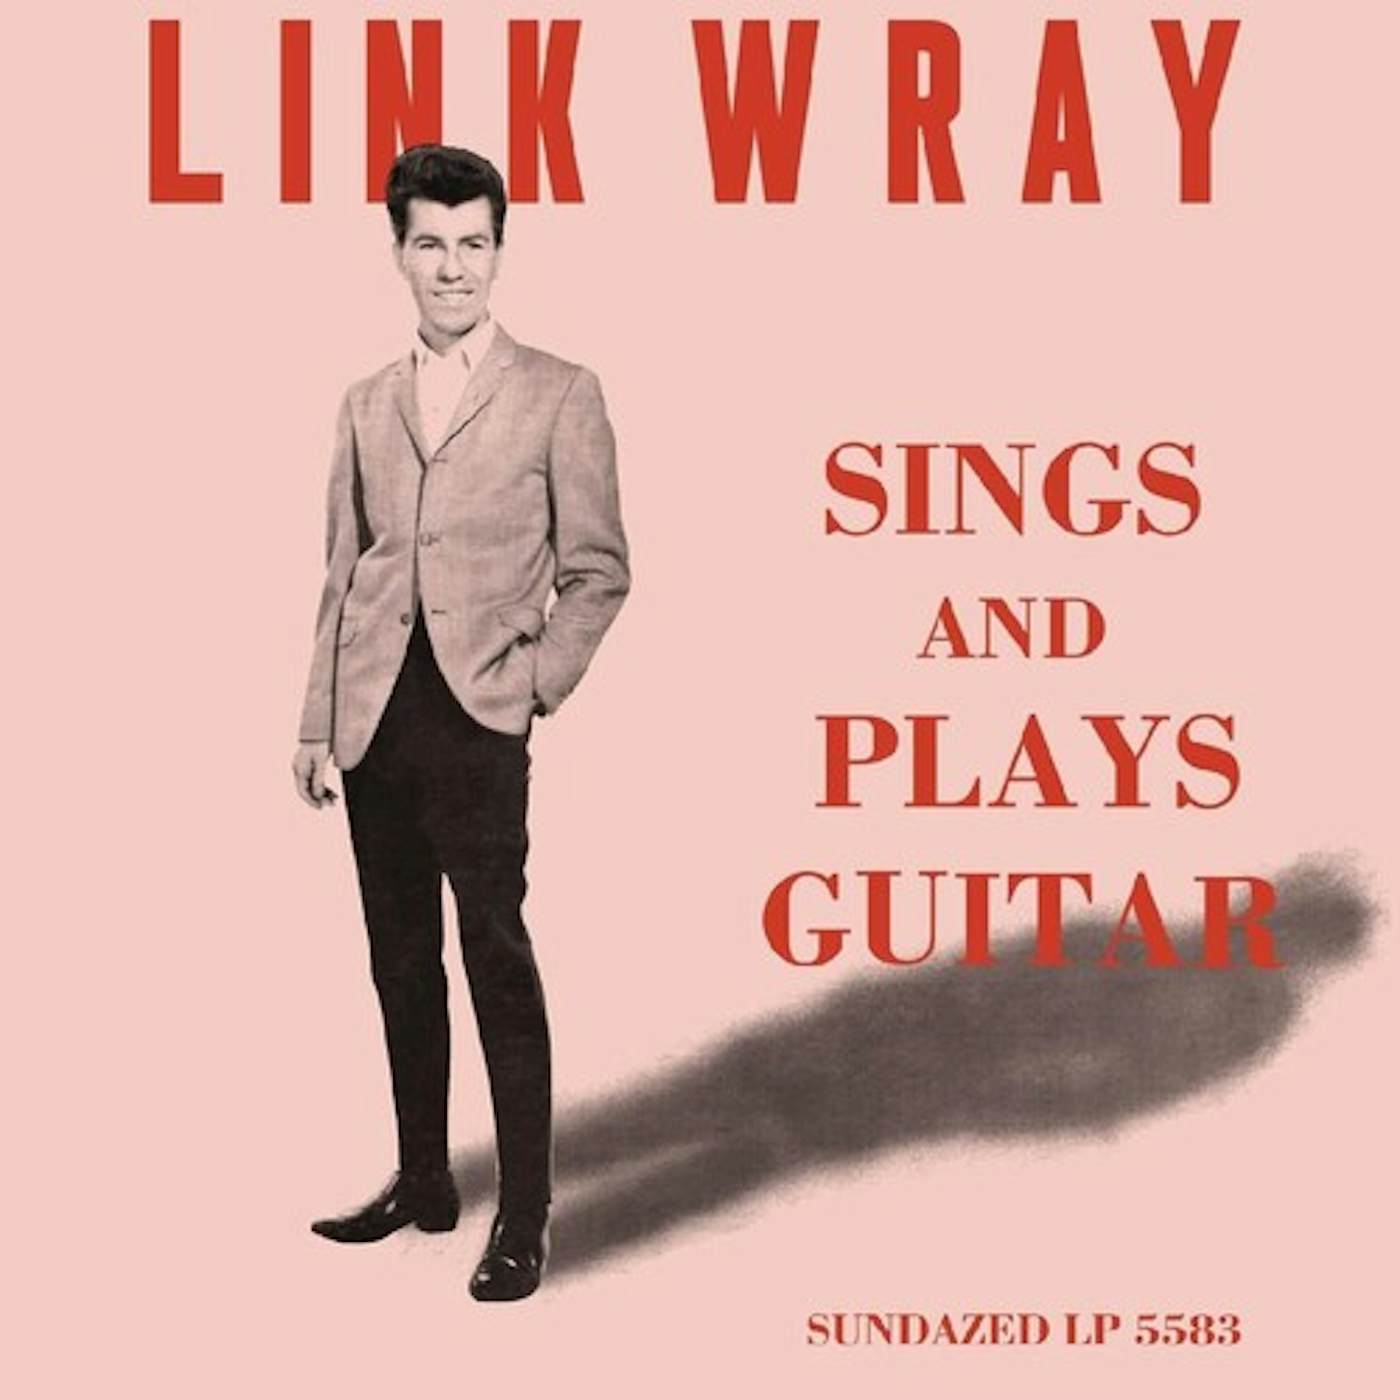 Link Wray Sings and Plays Guitar Vinyl Record